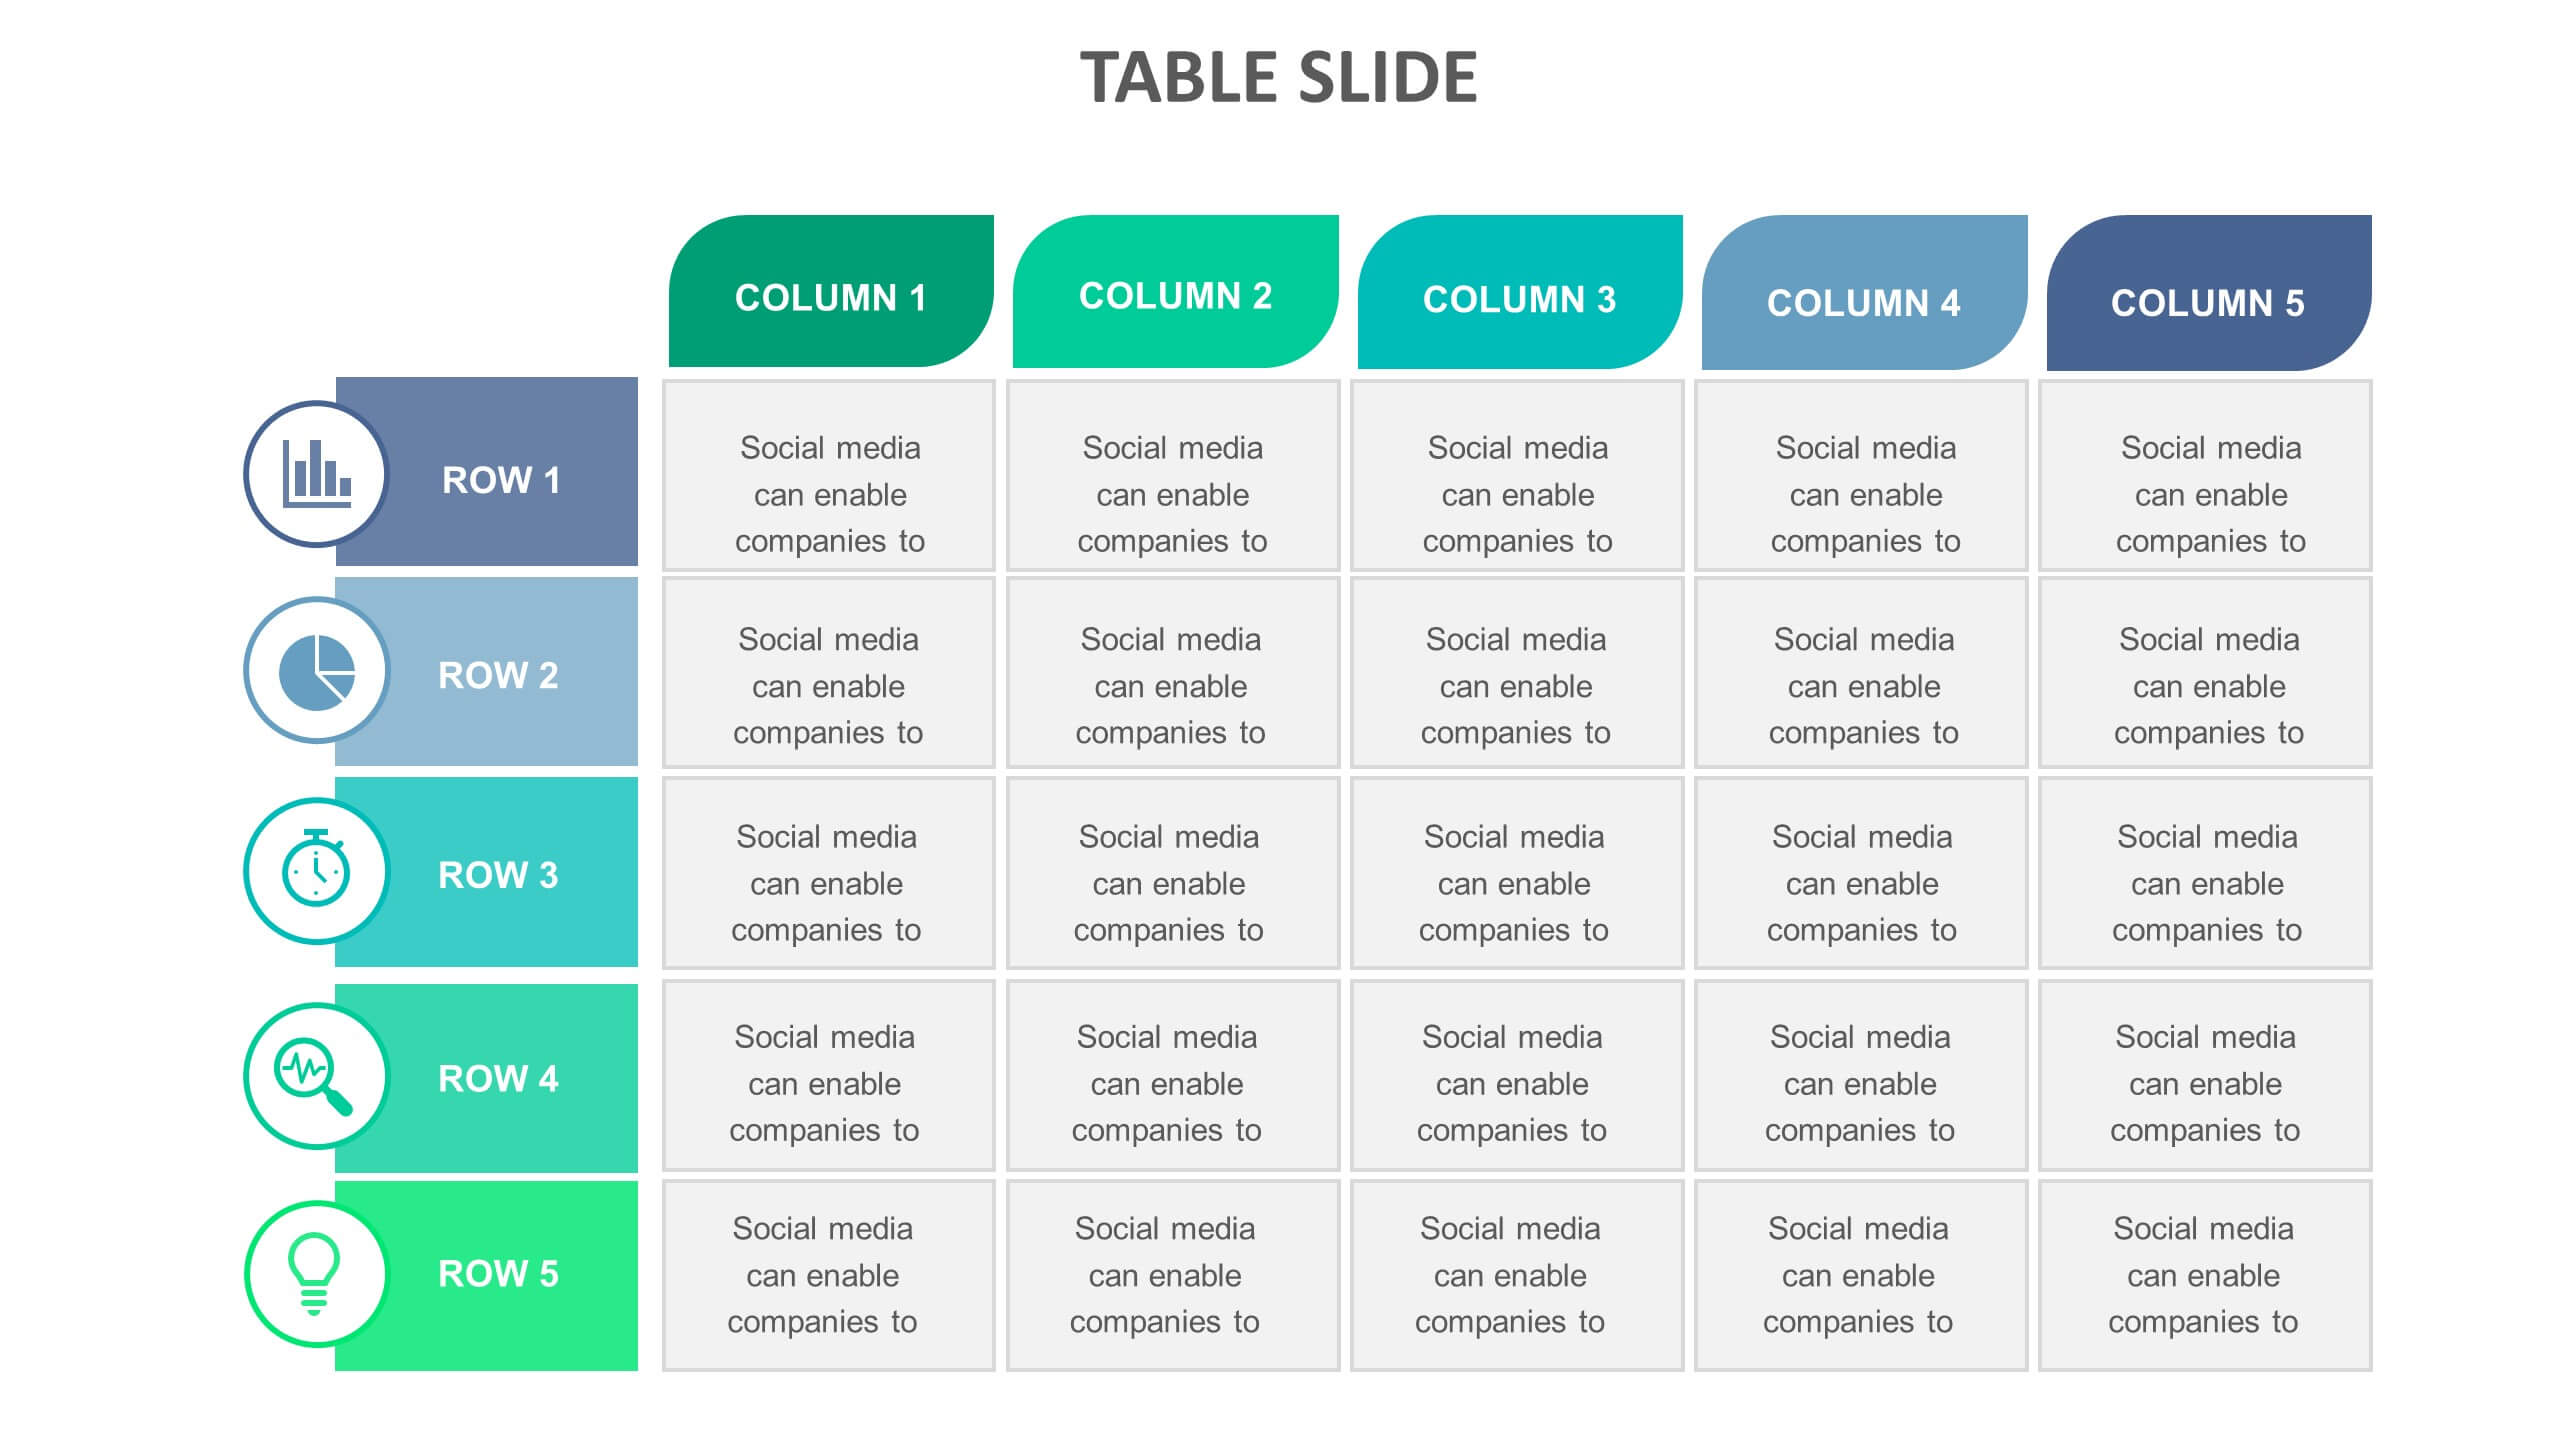 simple table format suitable for presentation to top management